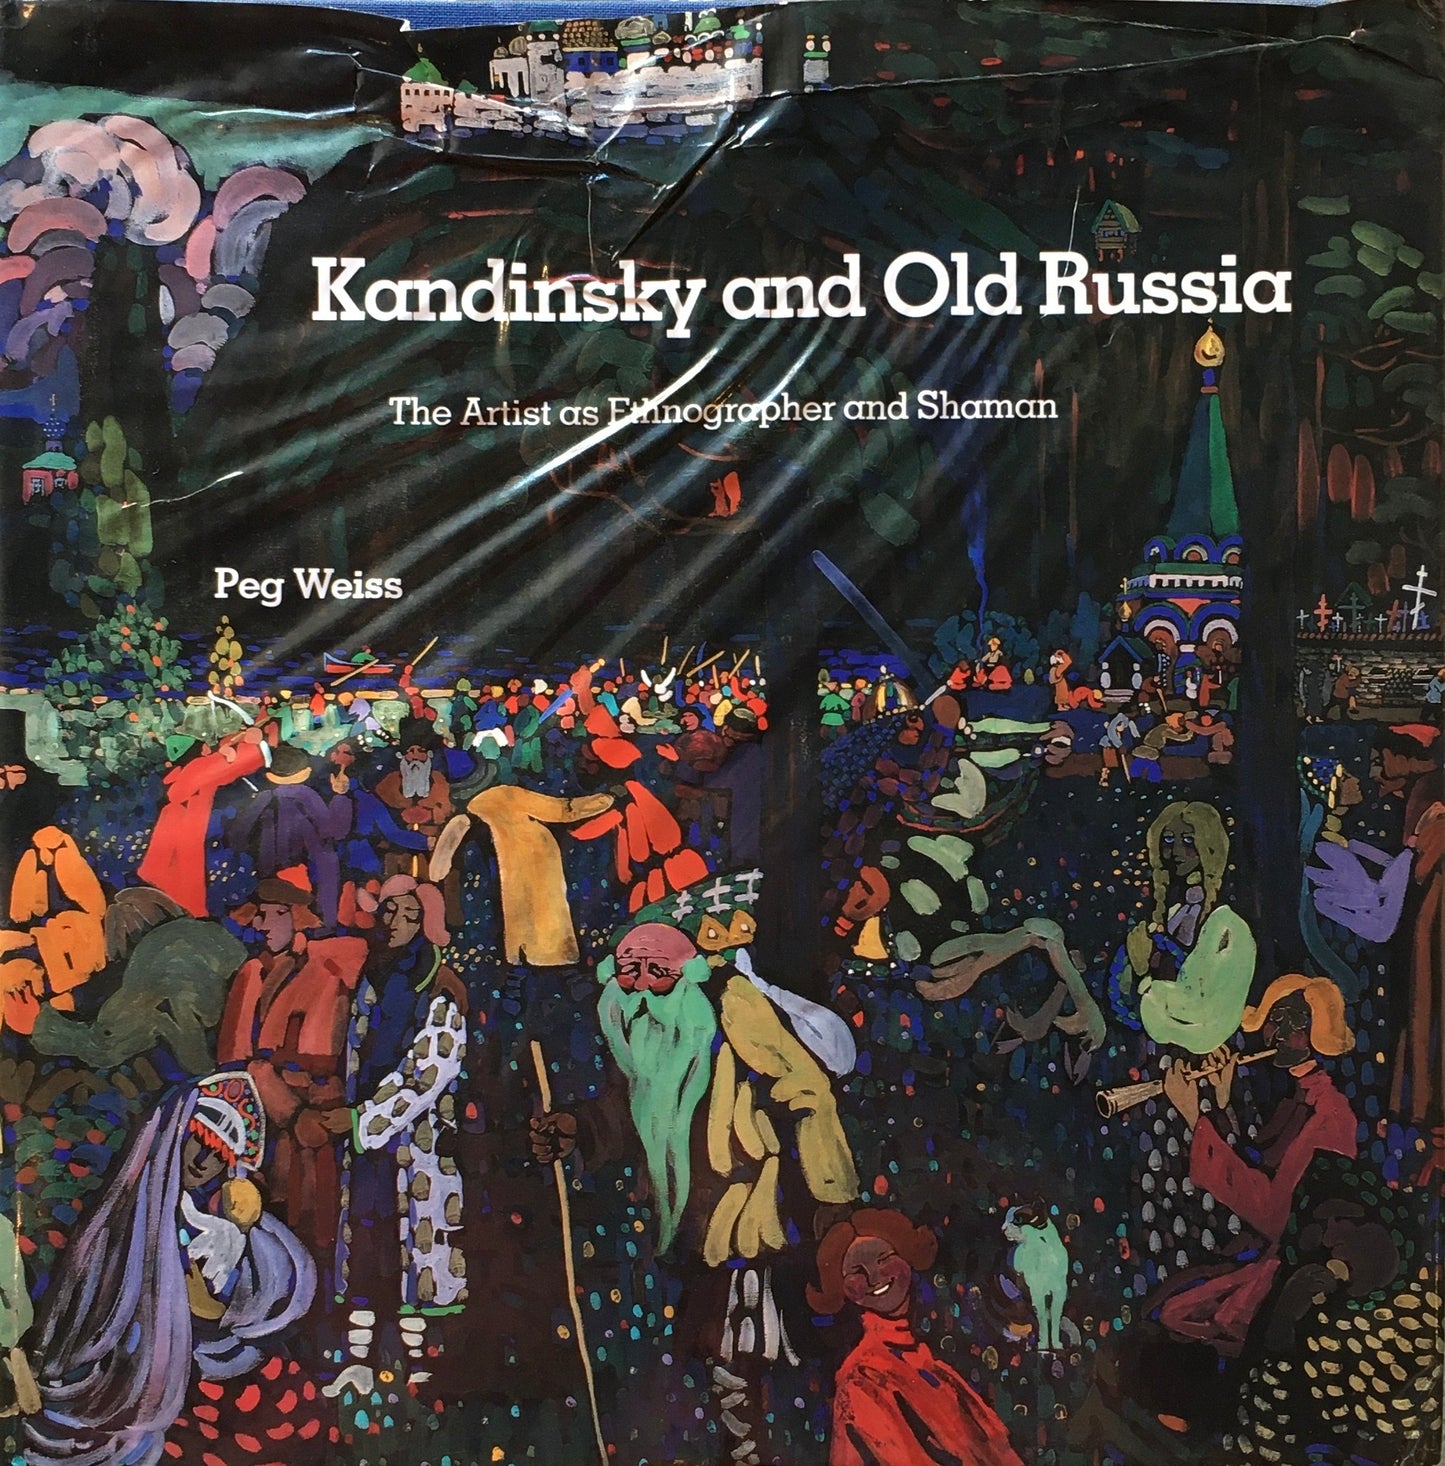 Kandinsky and Old Russia　The Artist as Ethnographer and Shaman 　Peg Weiss 　カンディンスキー　